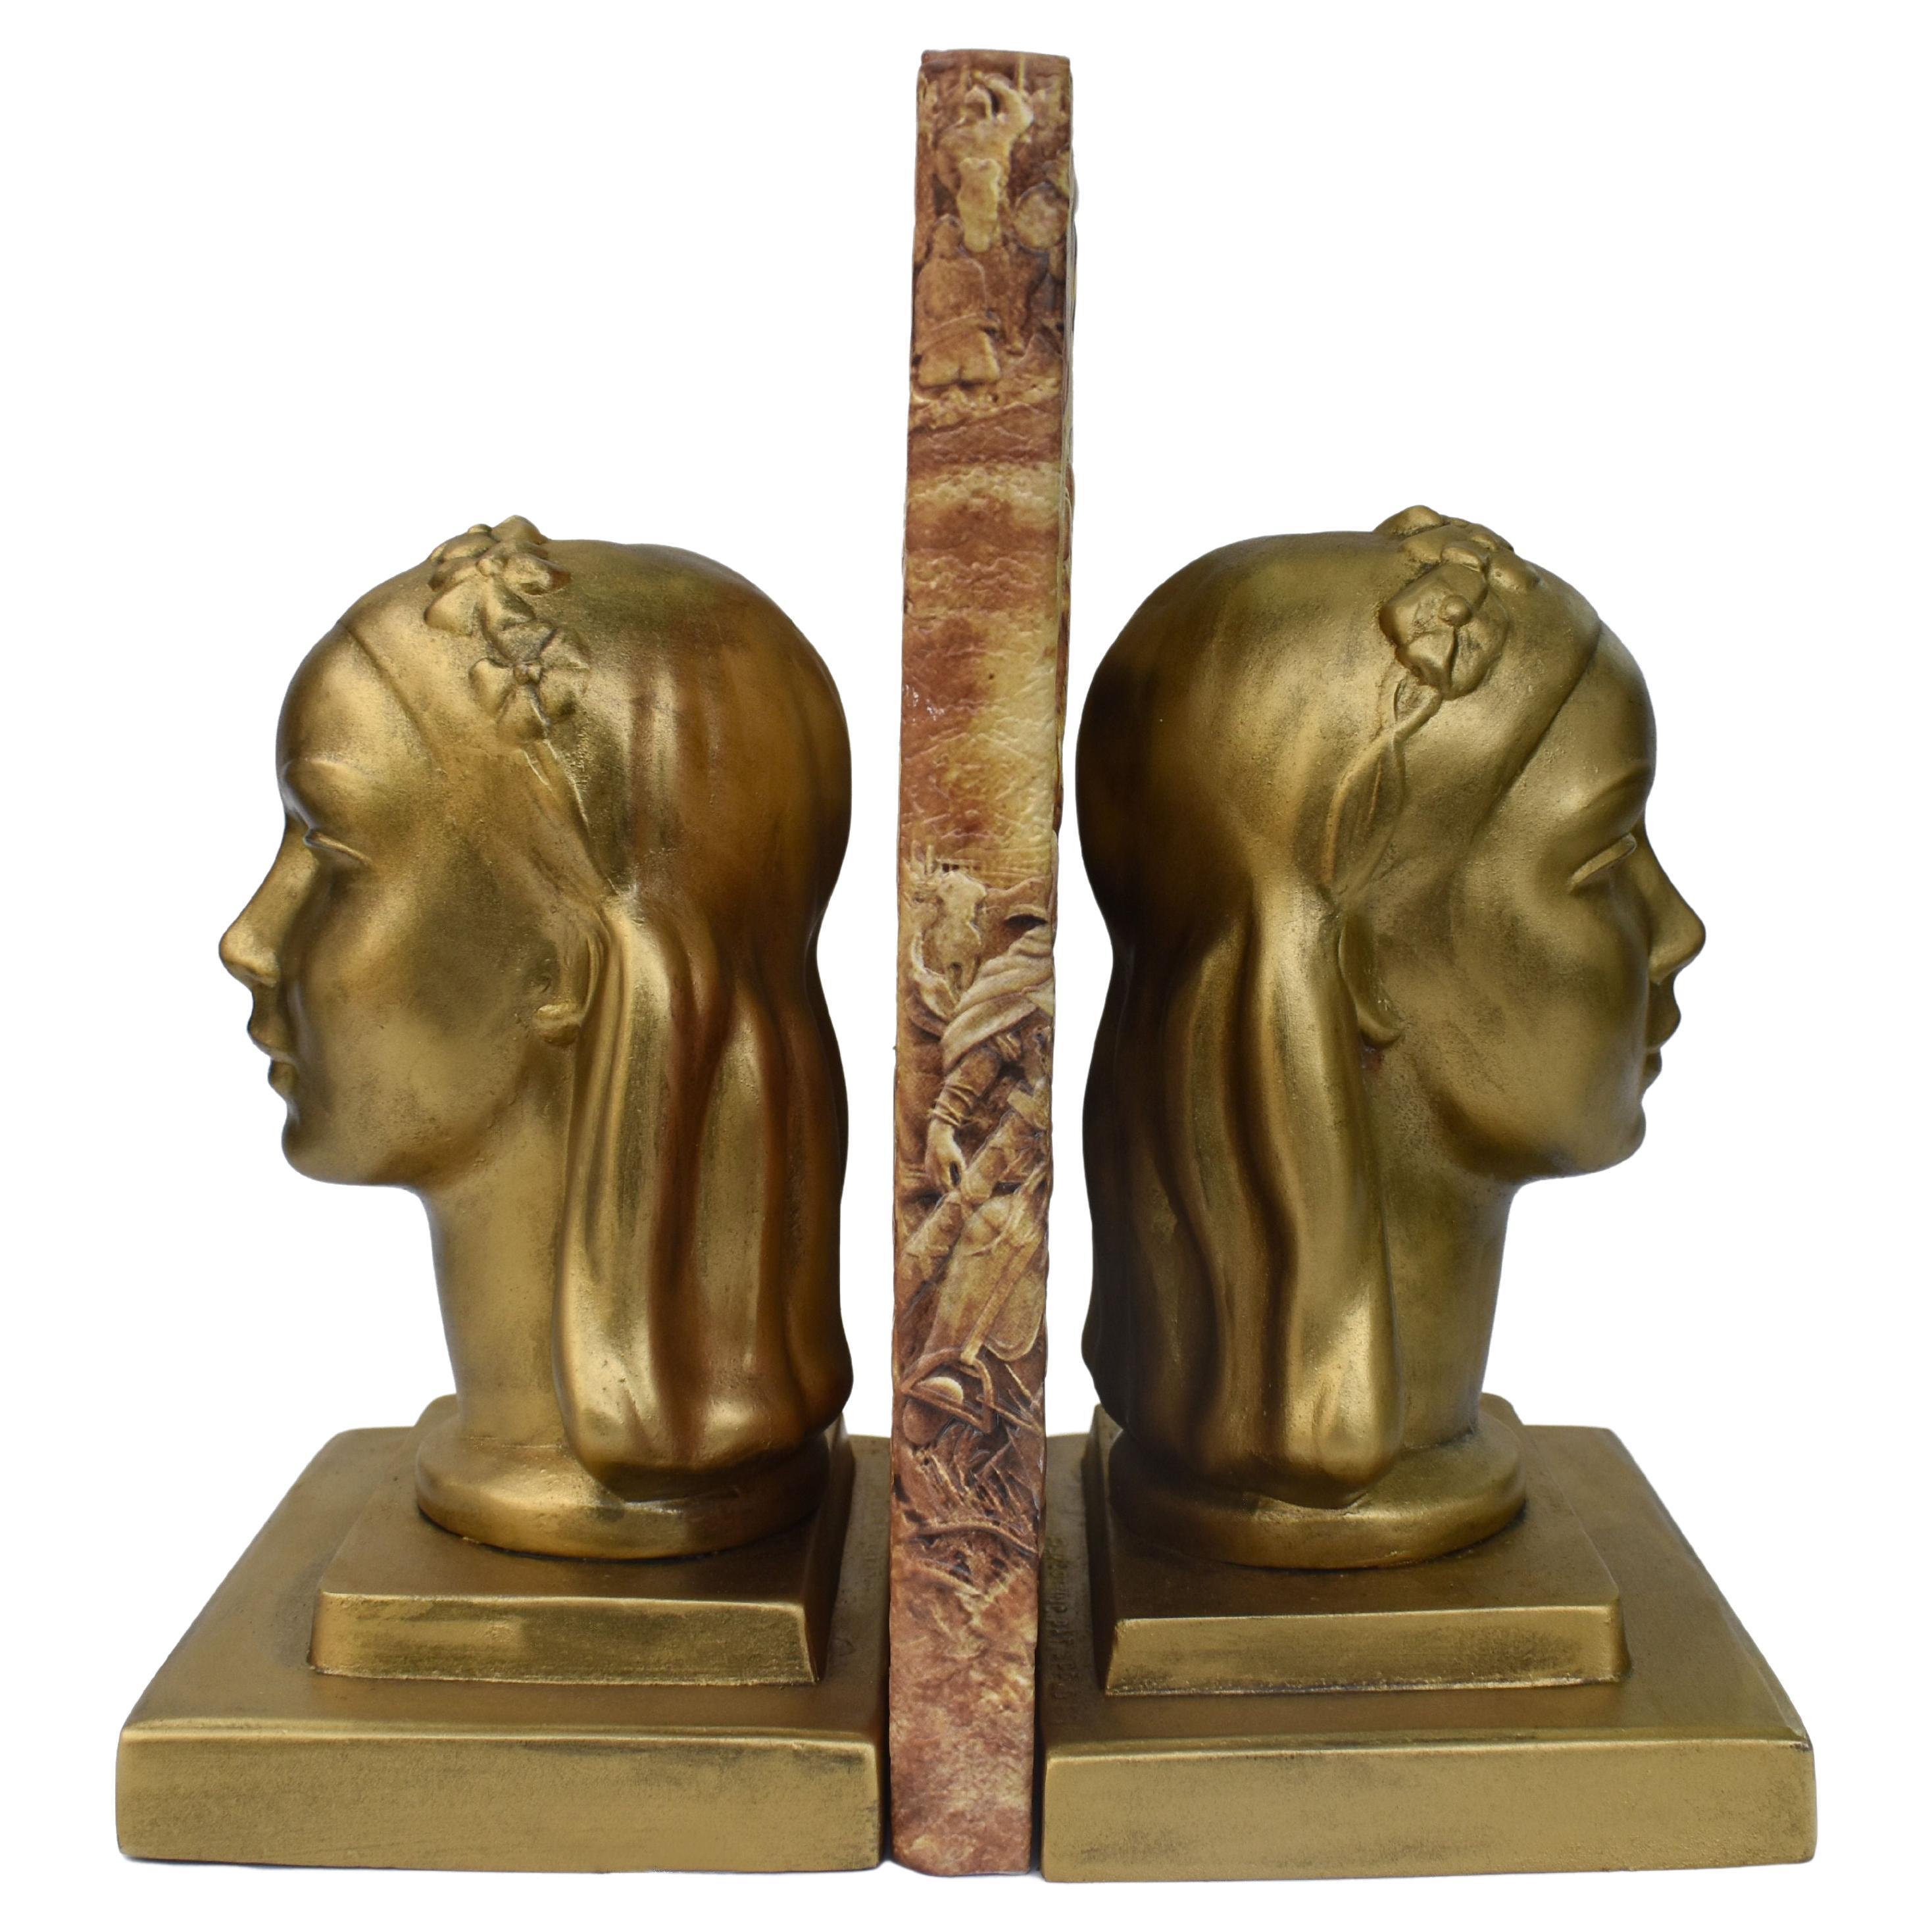 Art Deco Female Bust Bookends by Frankart Inc, c1930